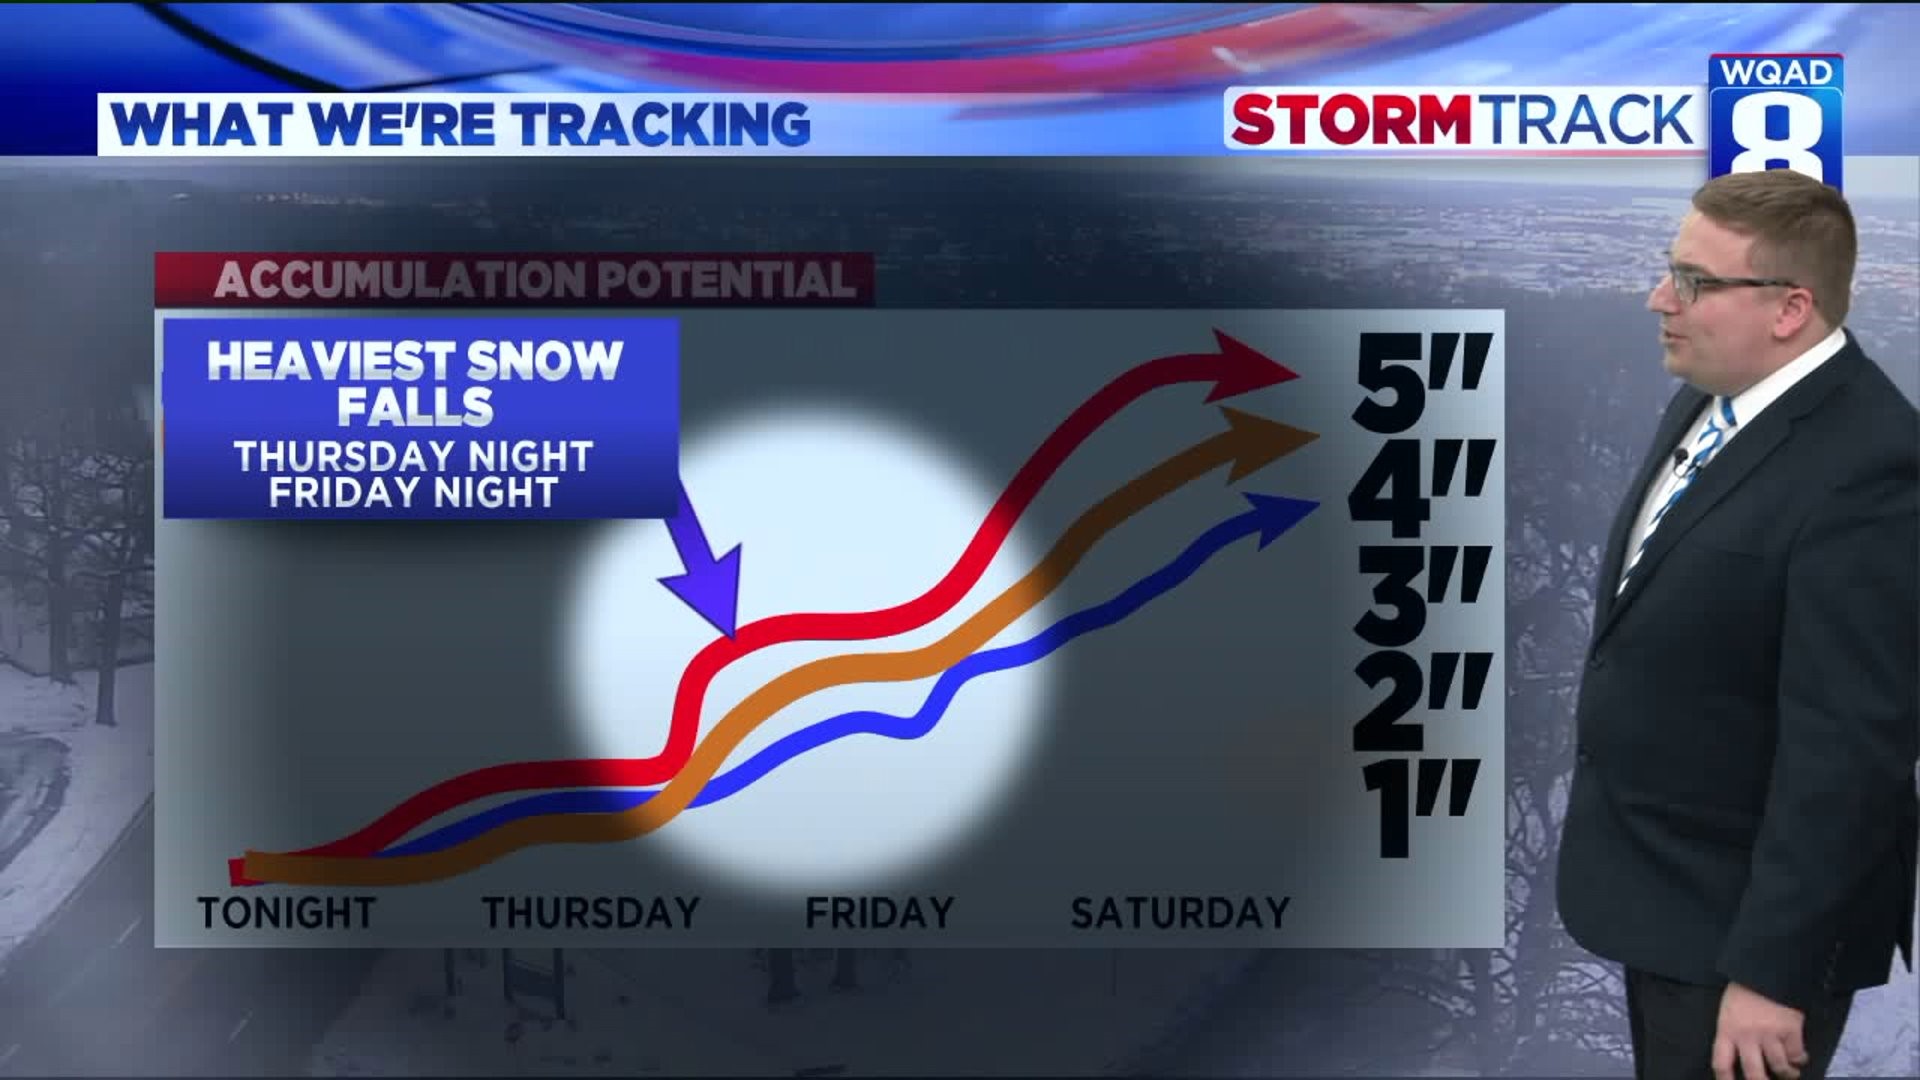 Tracking a new round of accumulating snow